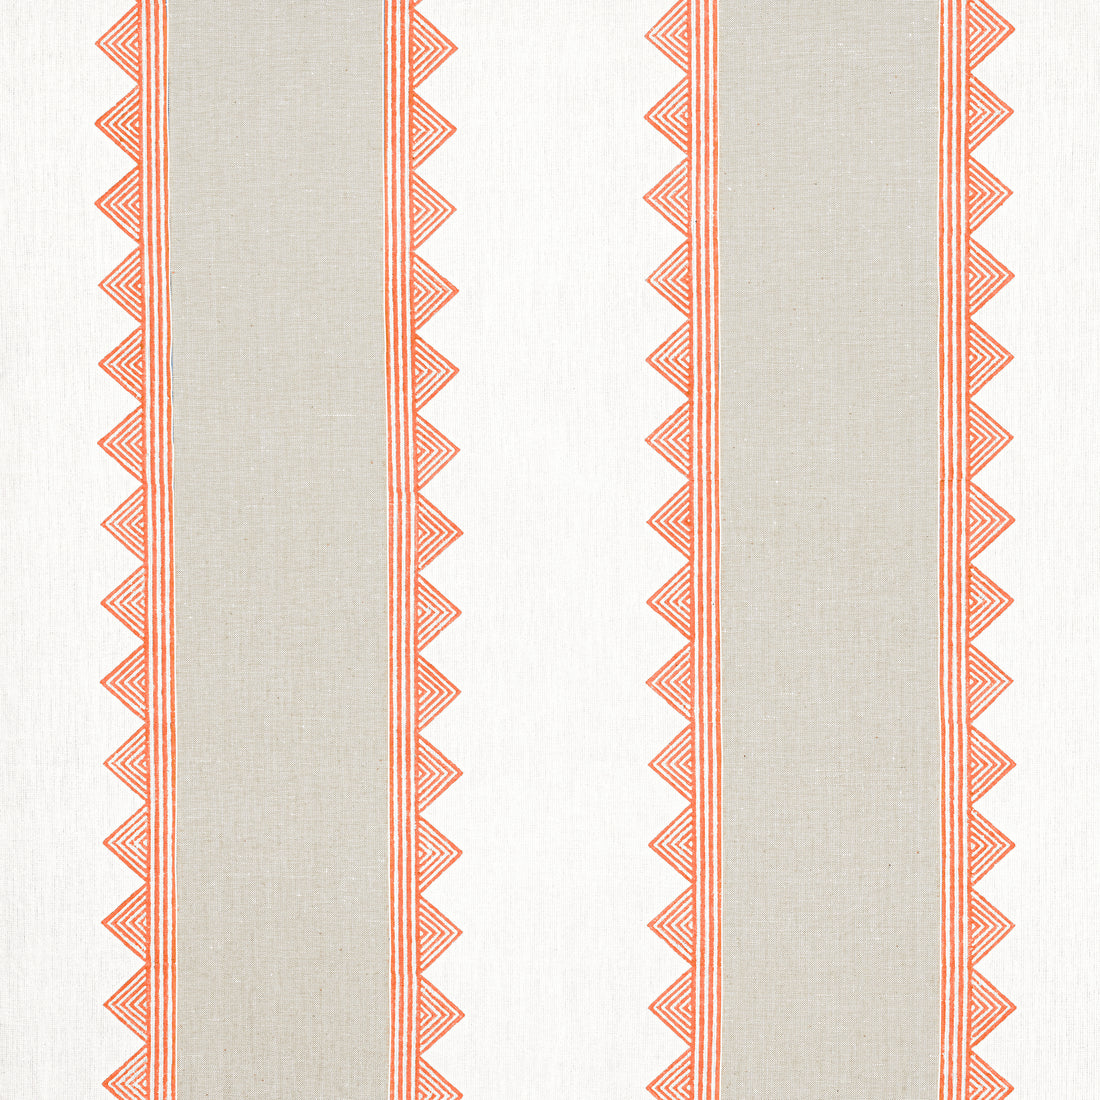 Kismet Stripe fabric in coral color - pattern number F916231 - by Thibaut in the Kismet collection